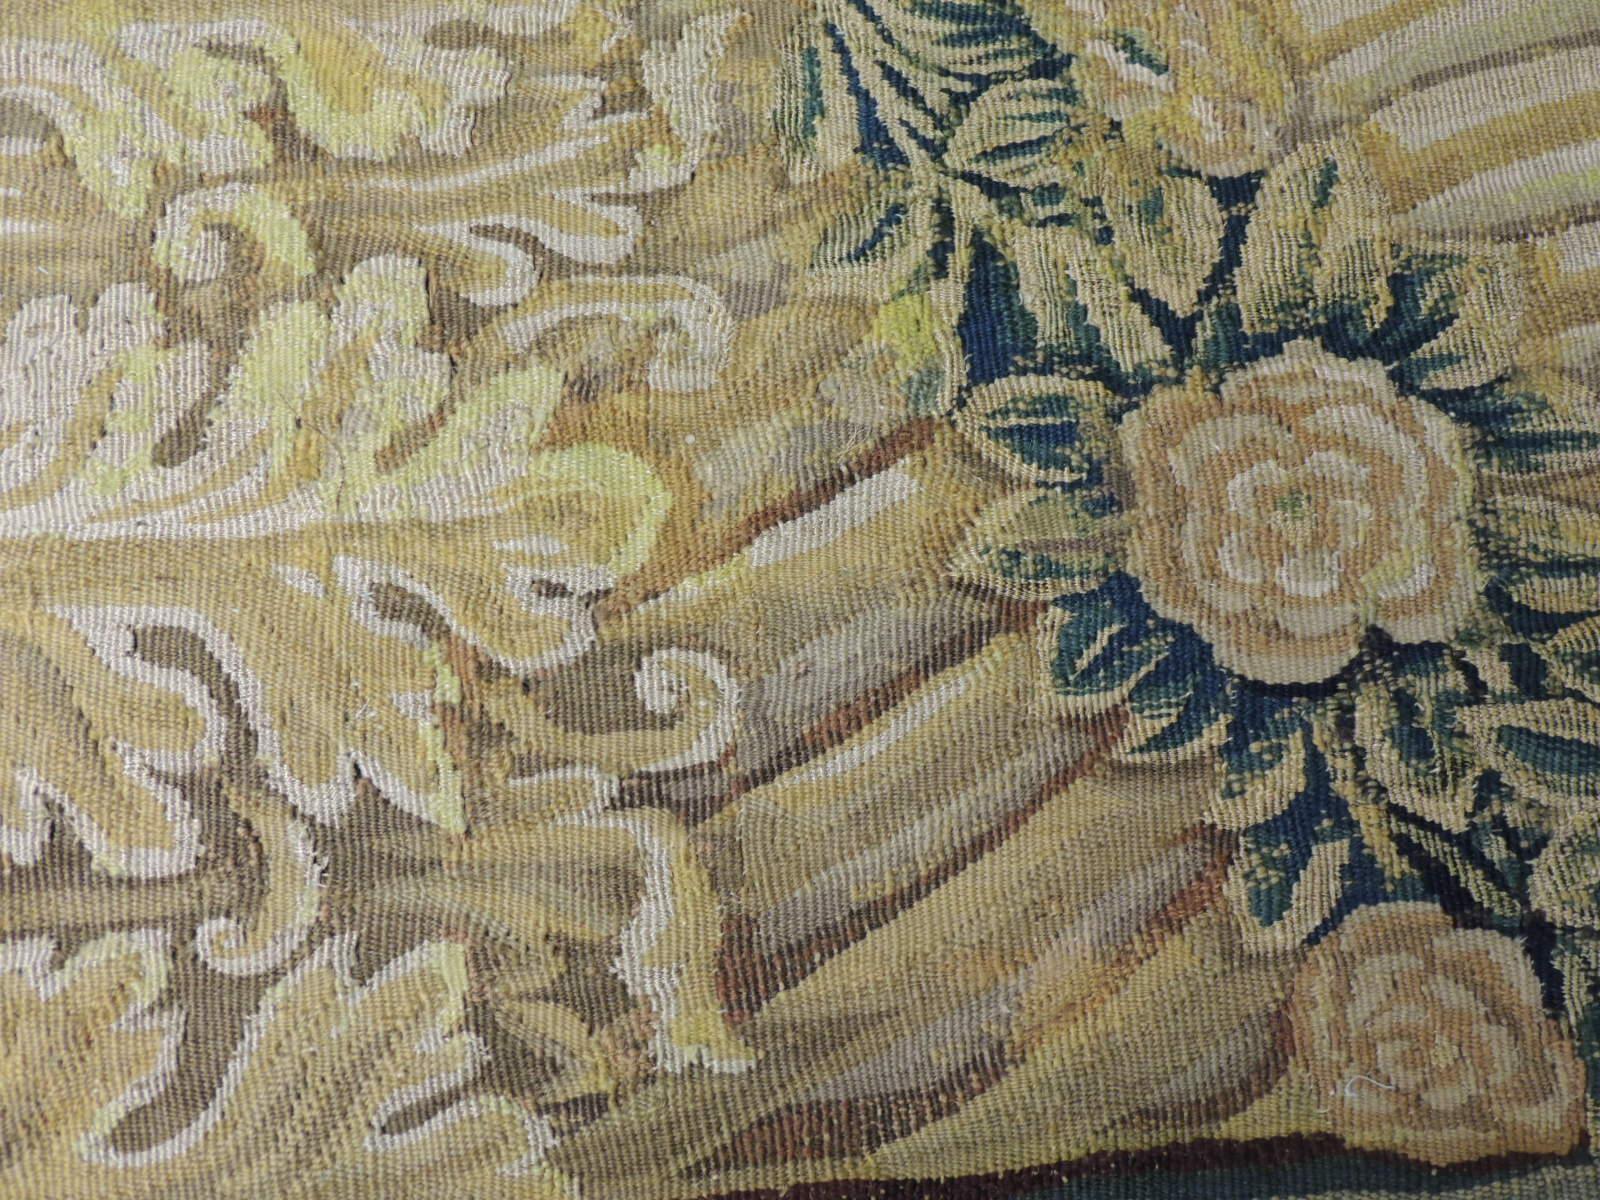 19th century green and gold verdure tapestry fragment, depicting acanthus leaves and flowers.
Framed with small French ribbon all around.
